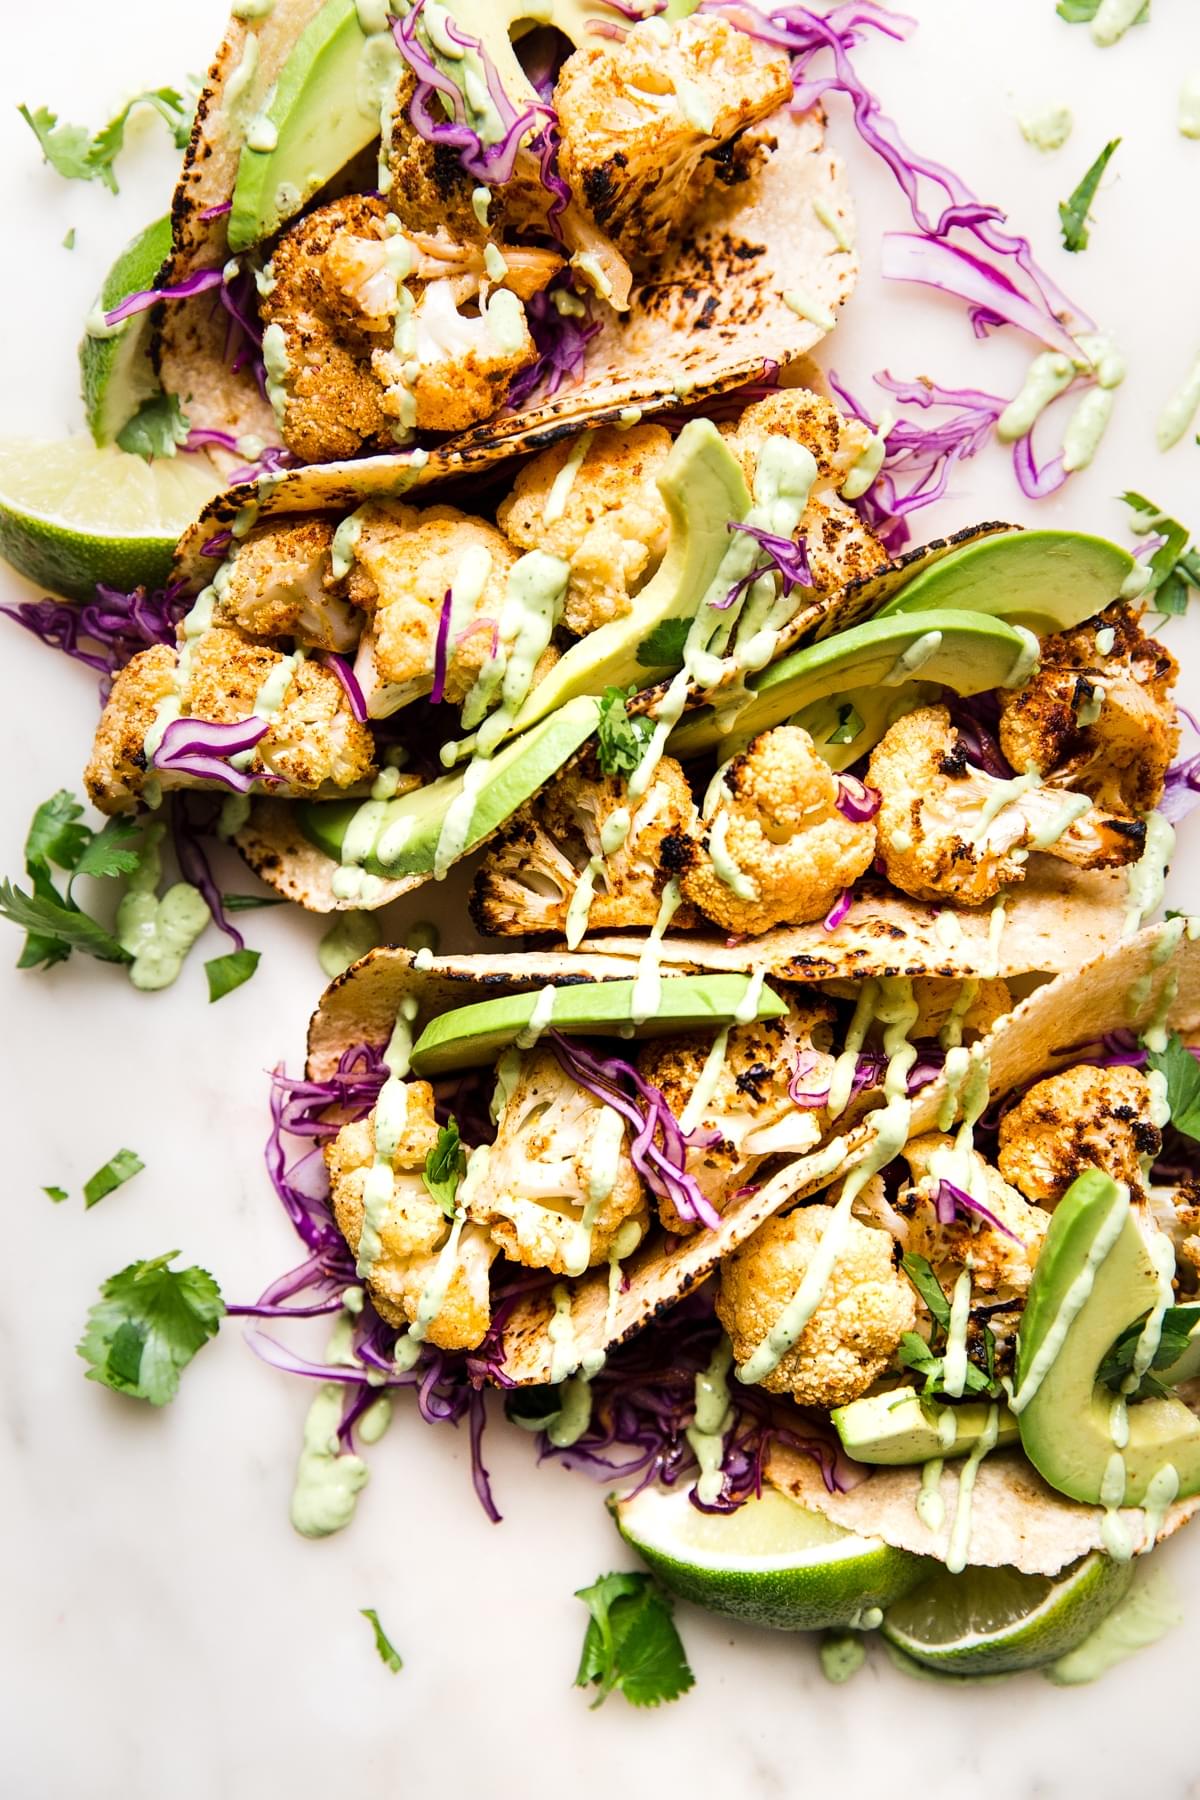 roasted cauliflower tacos with avocado crema, red cabbage